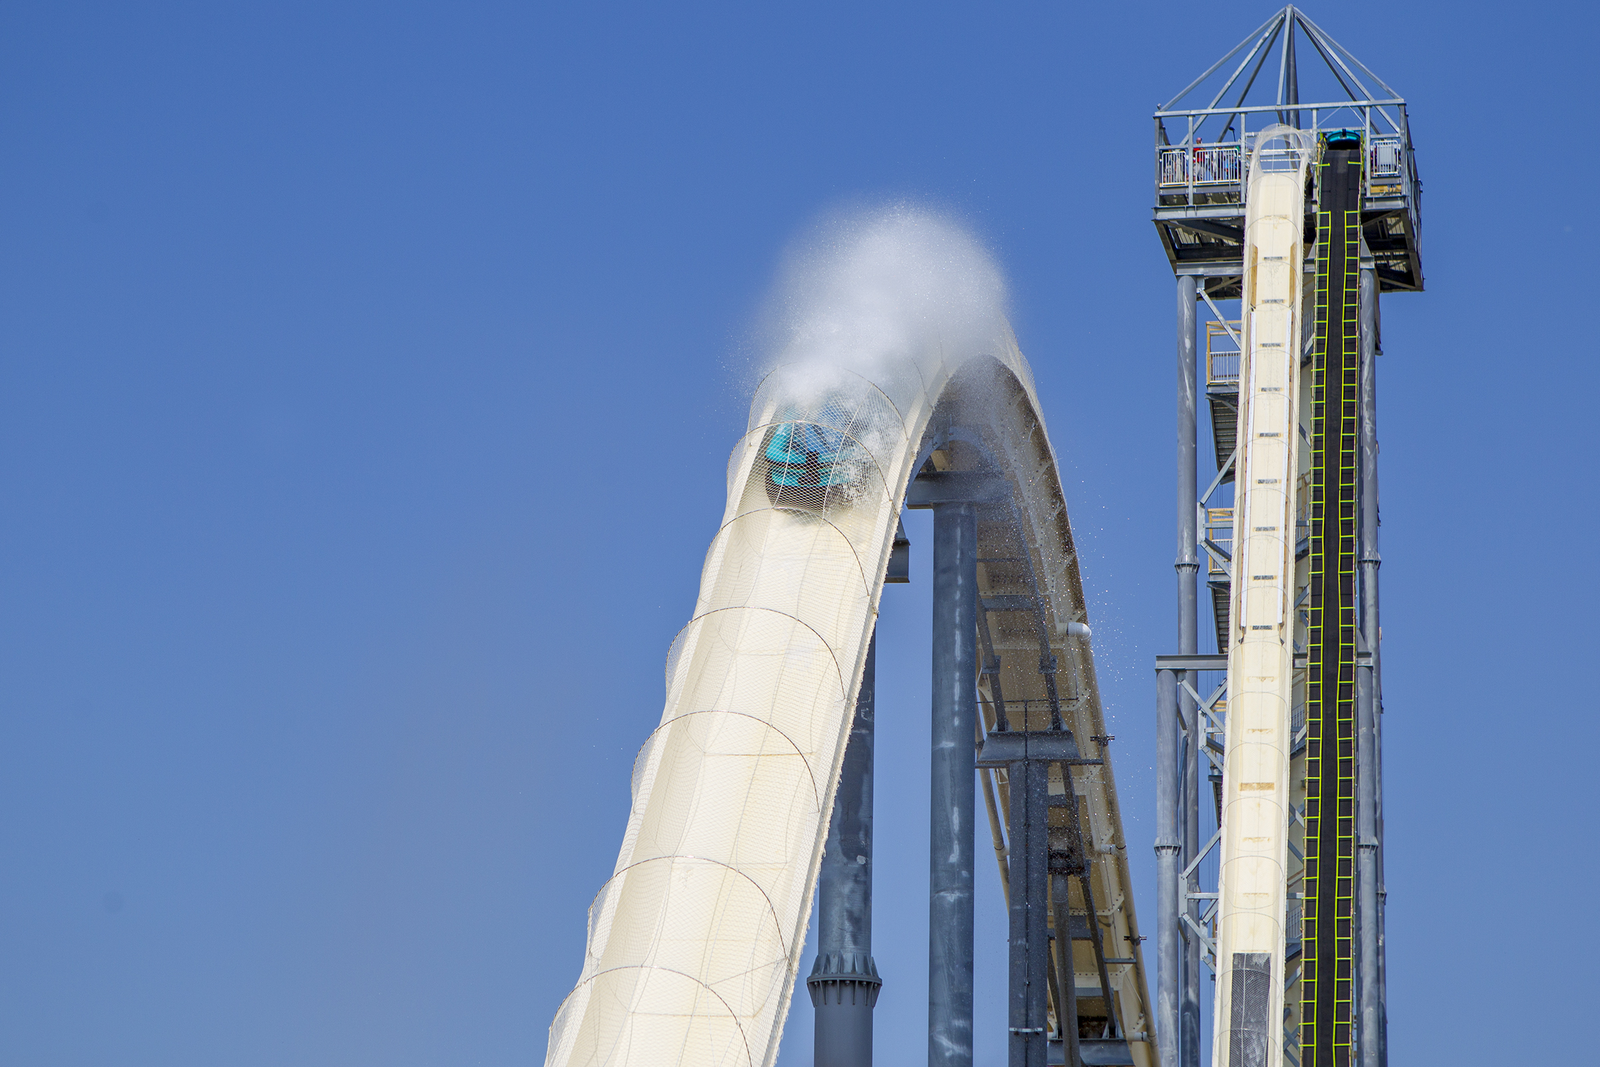 How Do You Build the World's Tallest Water Slide?